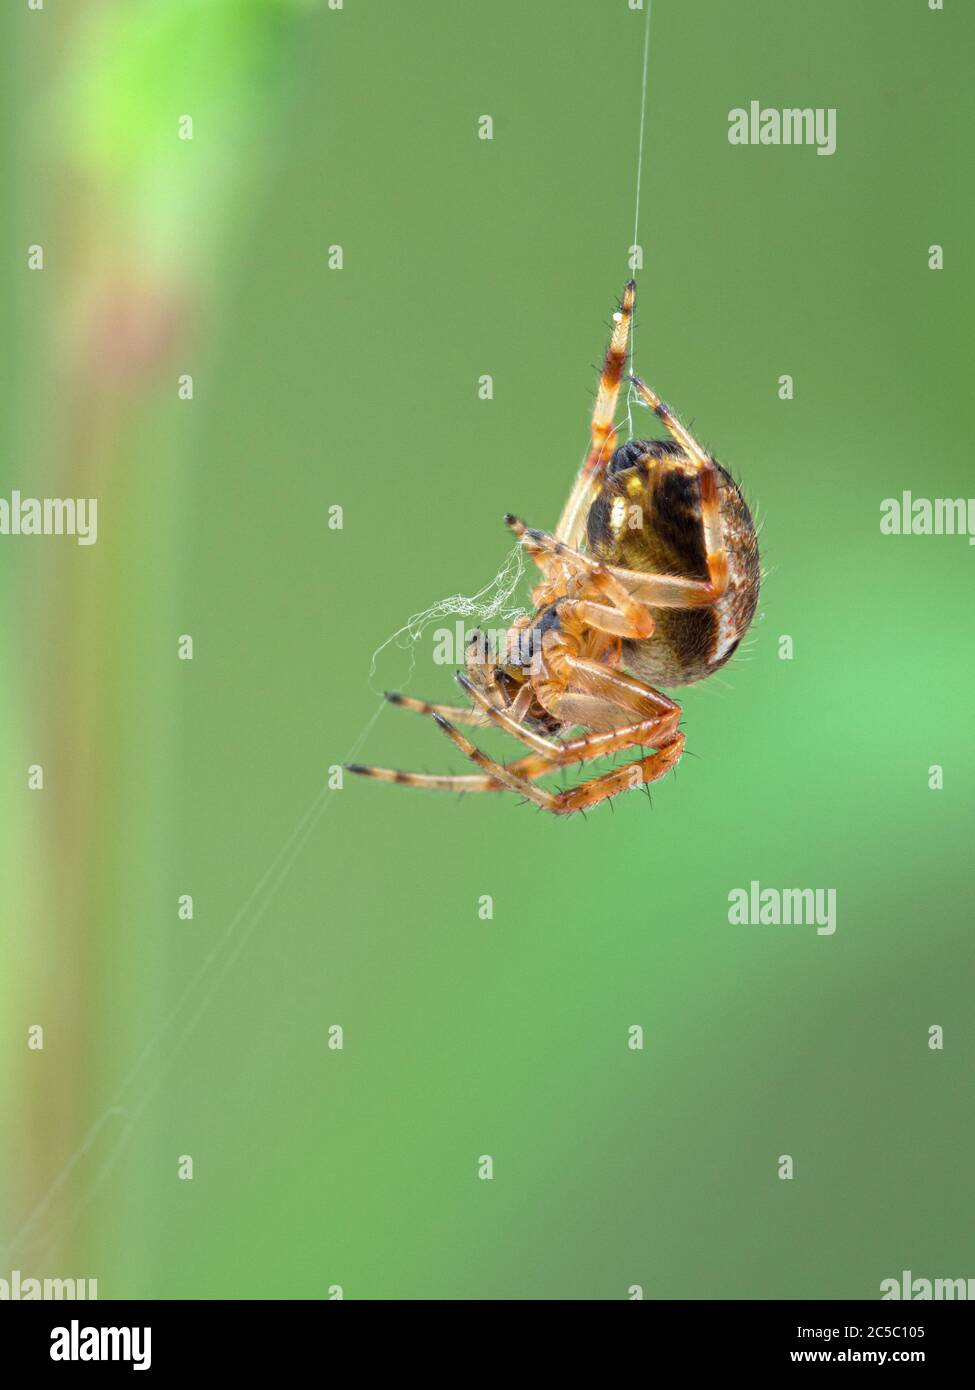 close-up of a colourful cross orbweaver spider, Araneus diadematus, hanging from a thread as it builds a web. Boundary Bay saltmarsh, Ladner, Delta, B Stock Photo